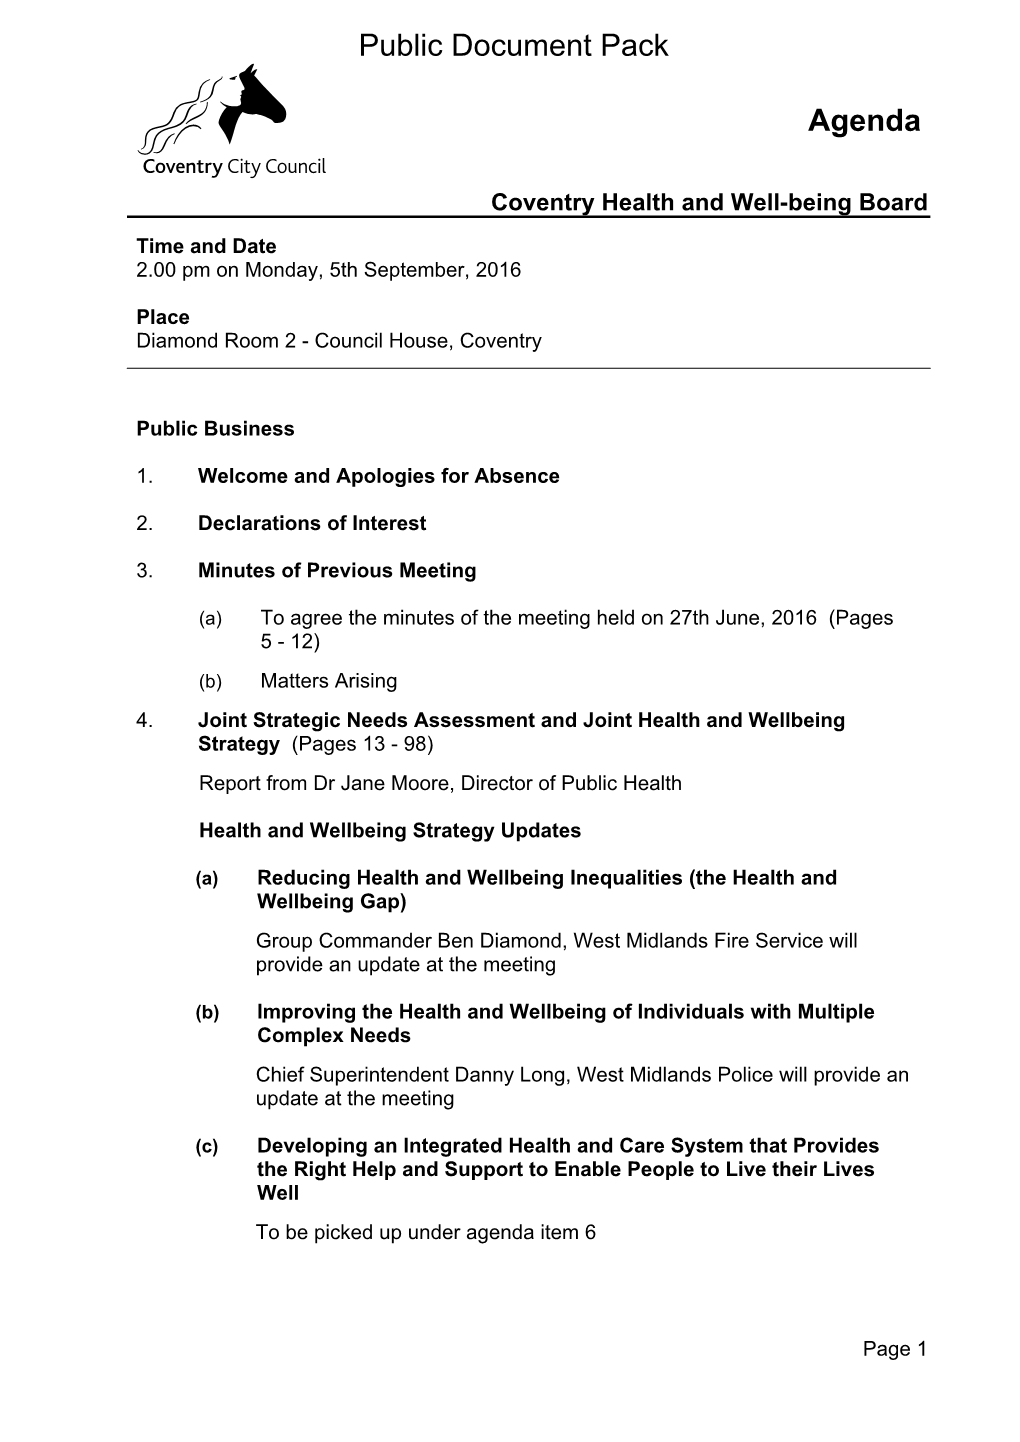 (Public Pack)Agenda Document for Coventry Health and Well-Being